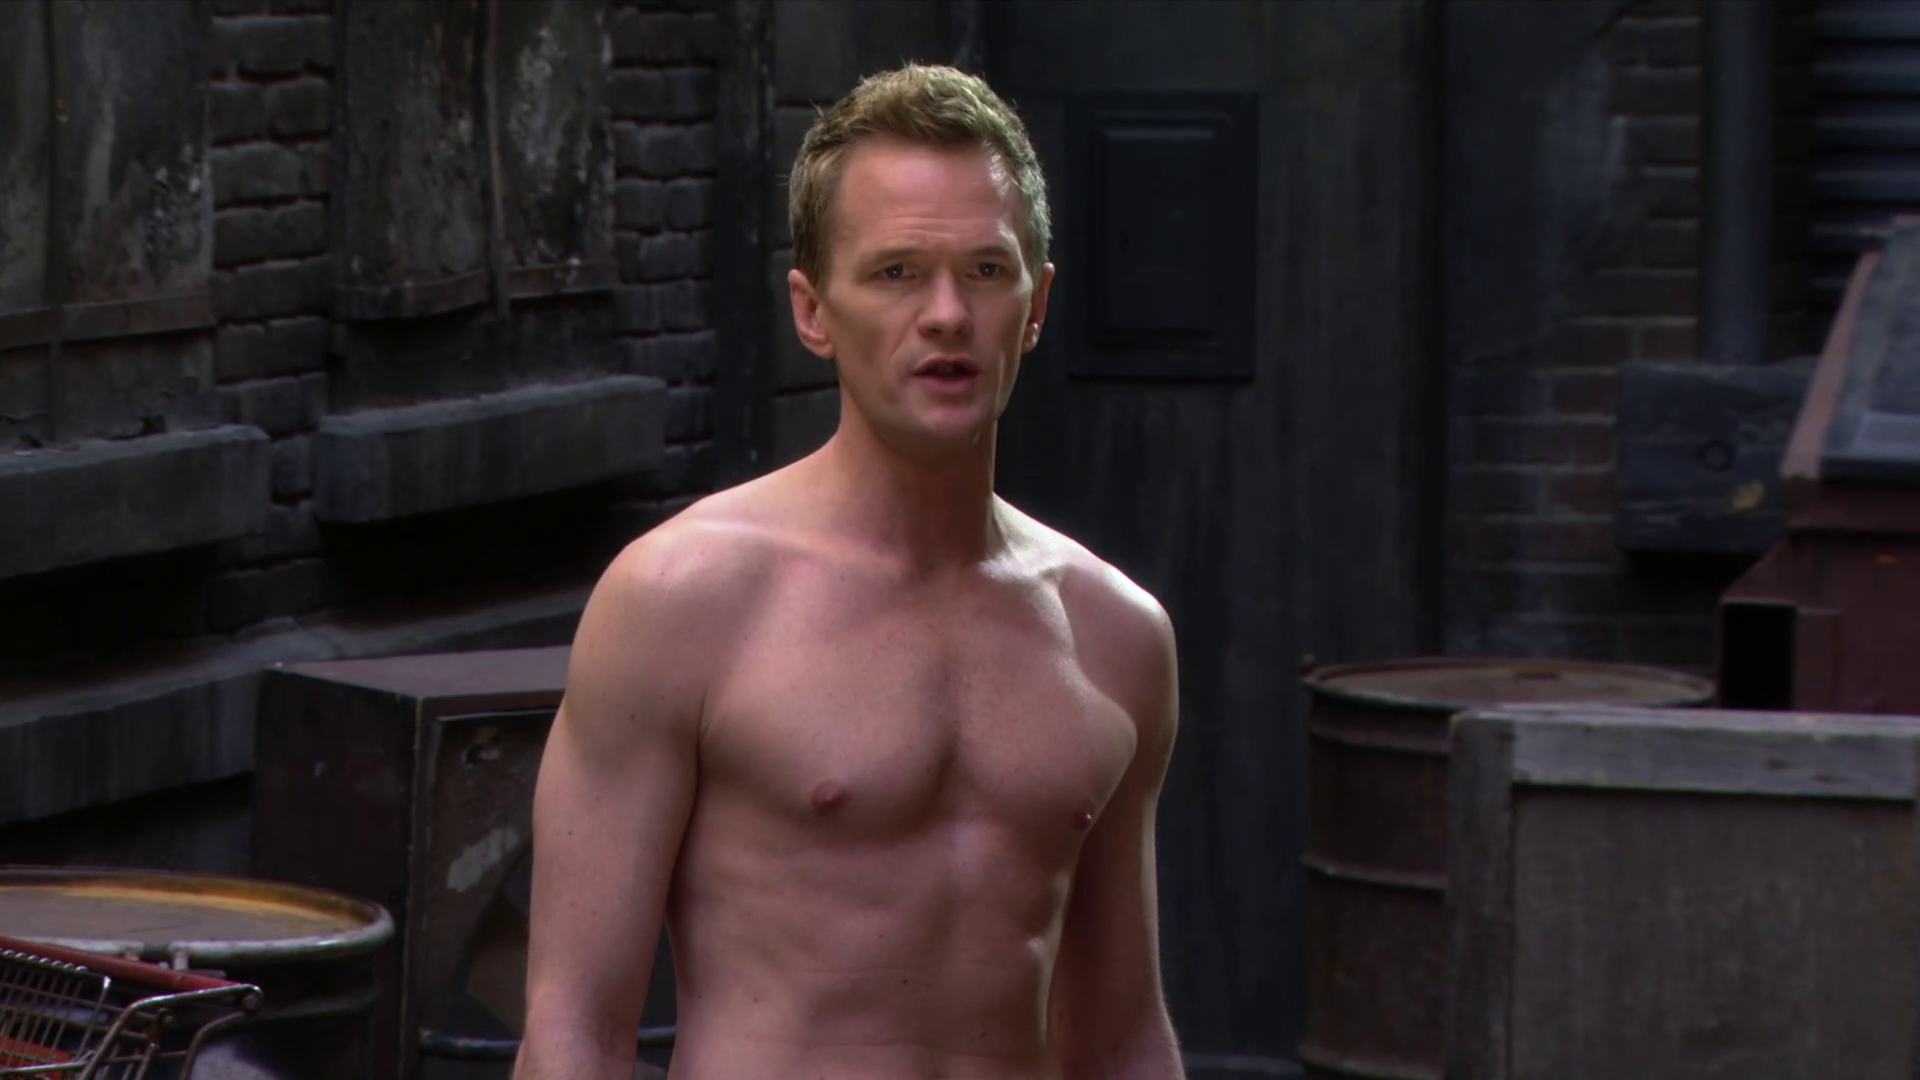 Neil Patrick Harris shirtless in How I Met Your Mother 7-23 "The Magic...